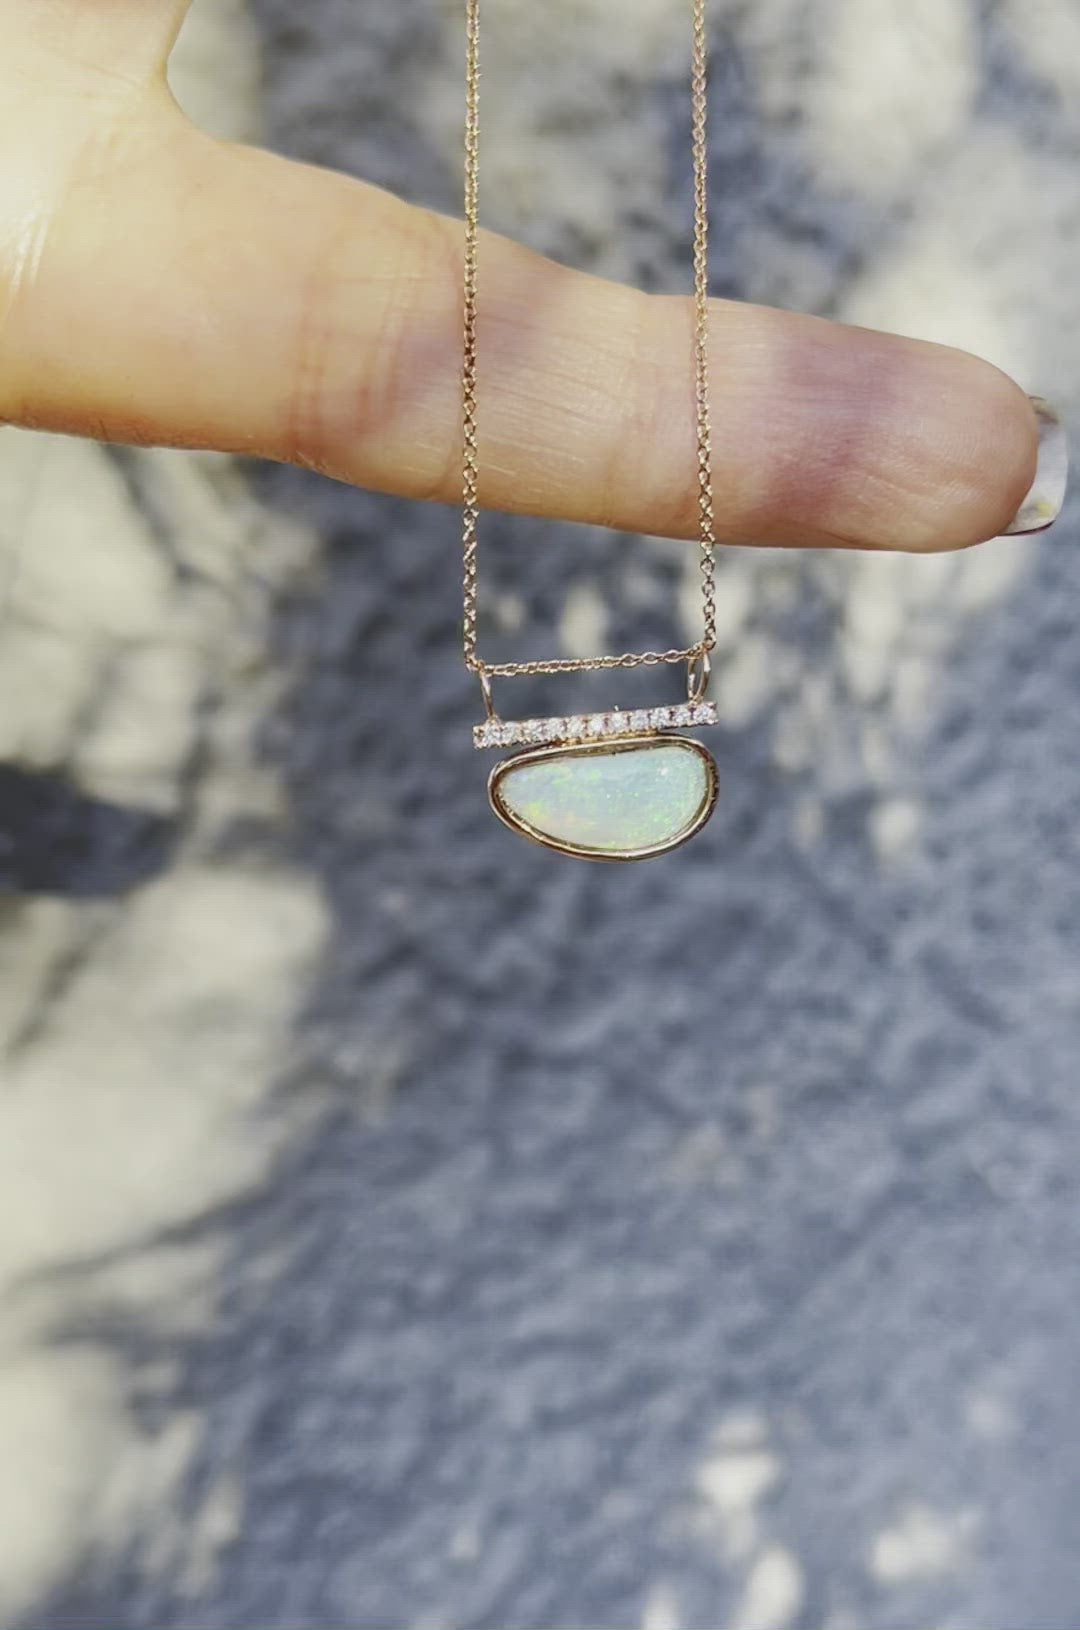 Video Head in the Clouds Crystal Opal Necklace No. 16 by NIXIN Jewelry